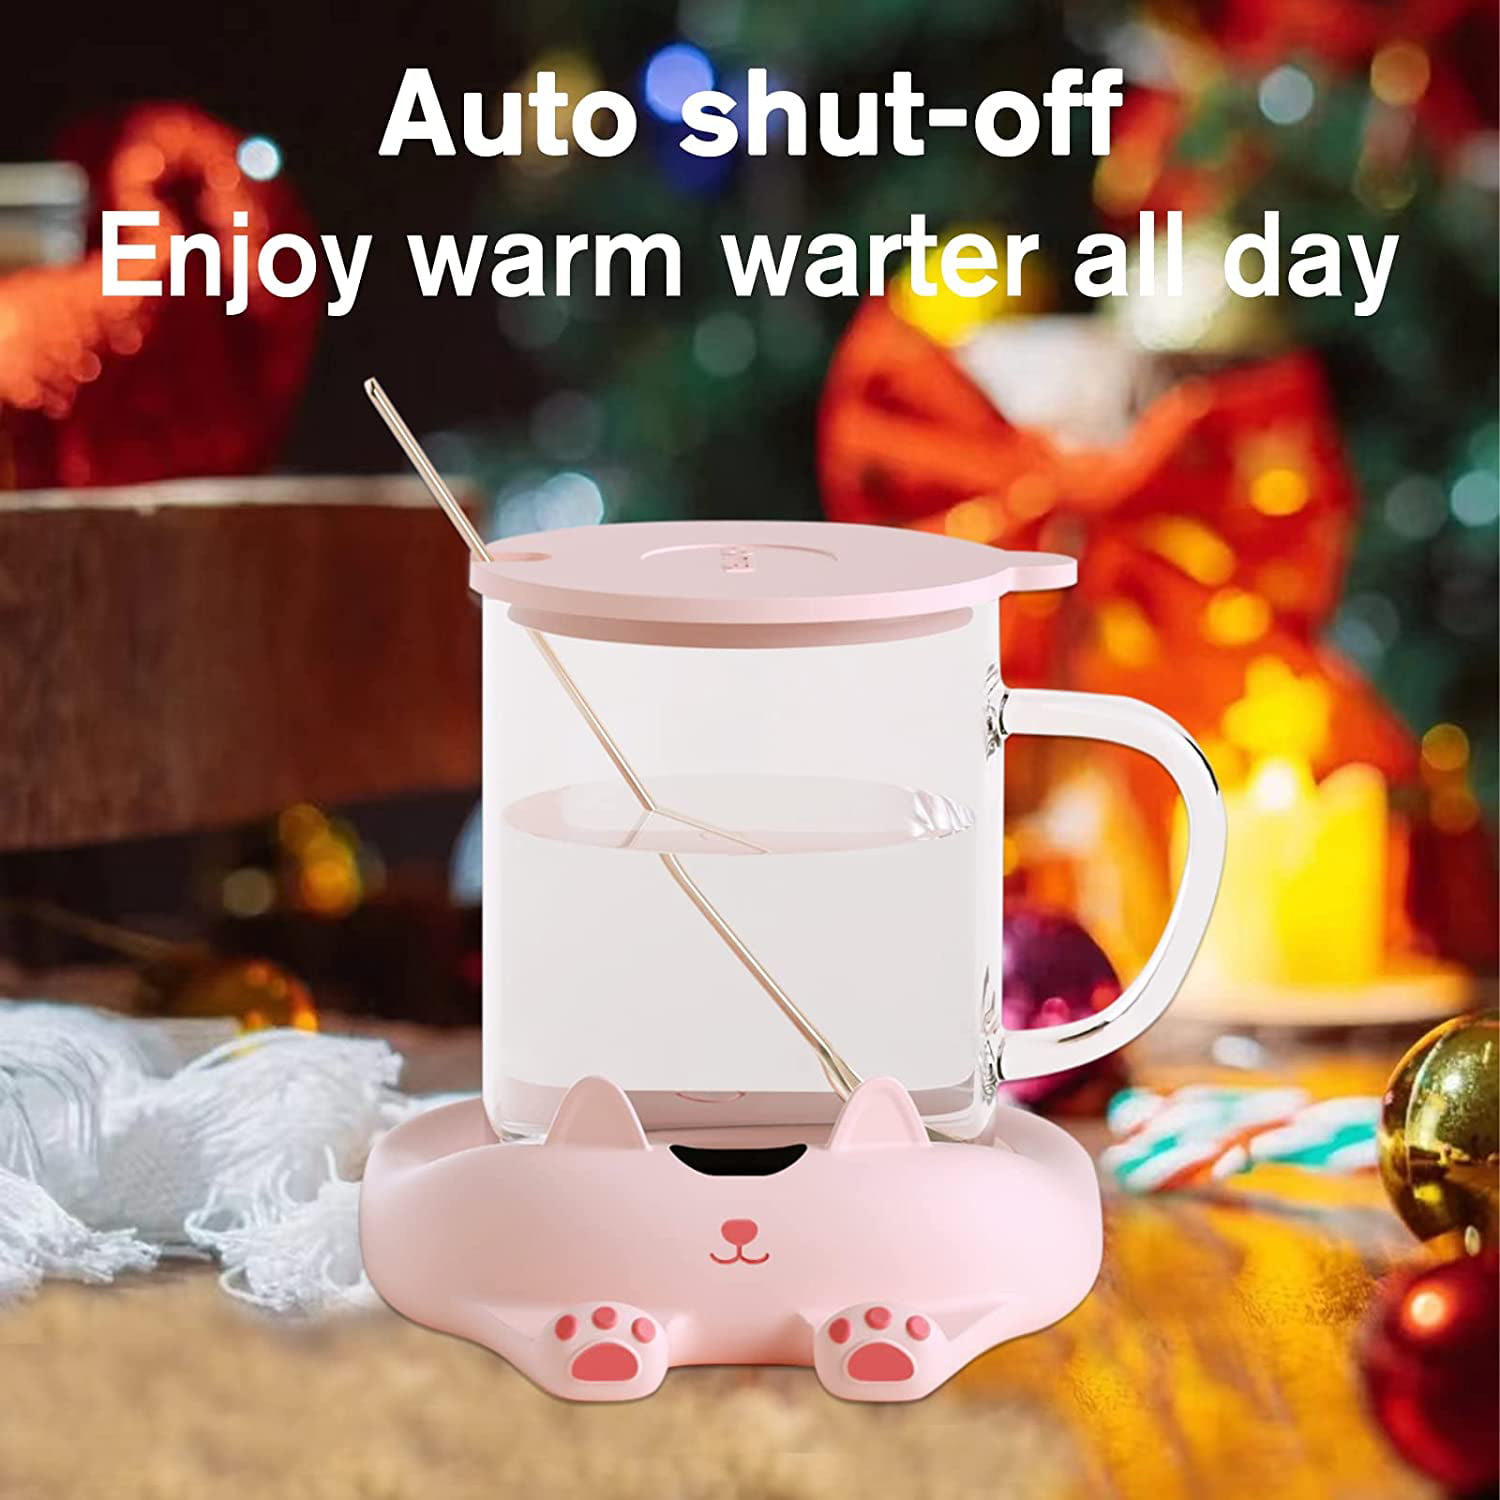 Smart Coffee Mug Warmer for Milk Tea Water Cocoa Cup Warmer with Essential  Oil Diffuser 3 Temperature Settings Gift Best Idea